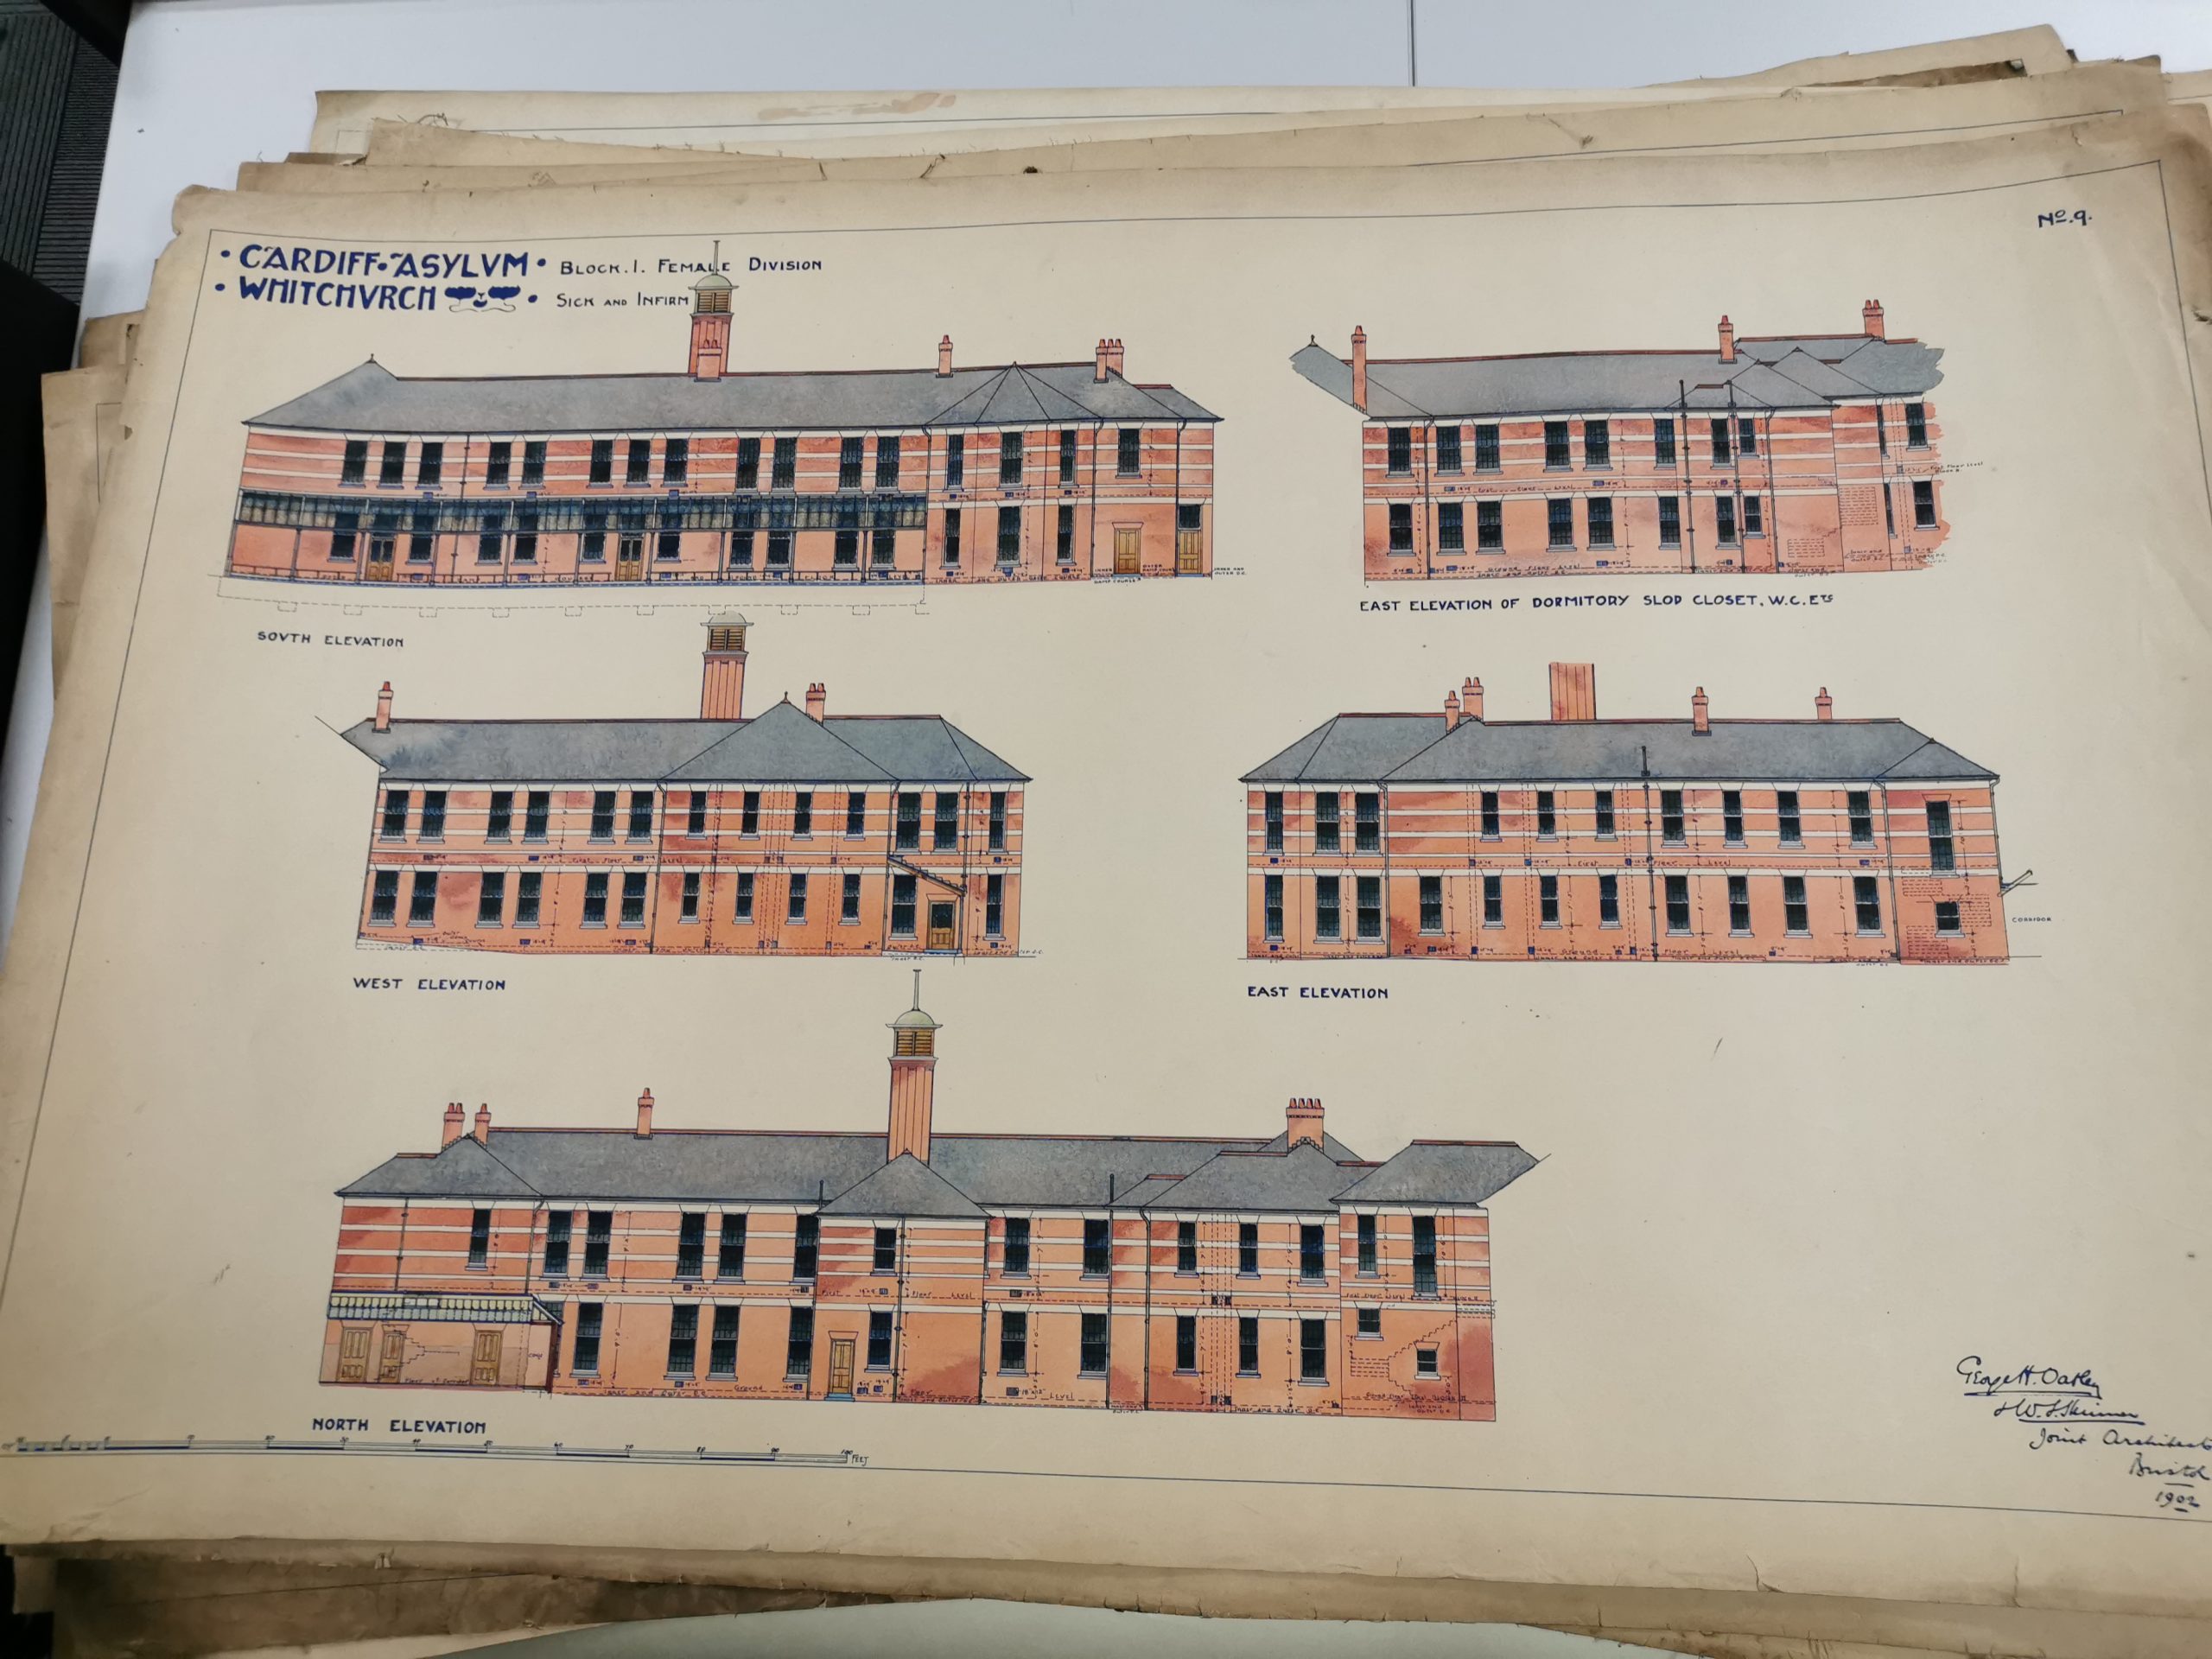 Original elevations of Whitchurch Hospital